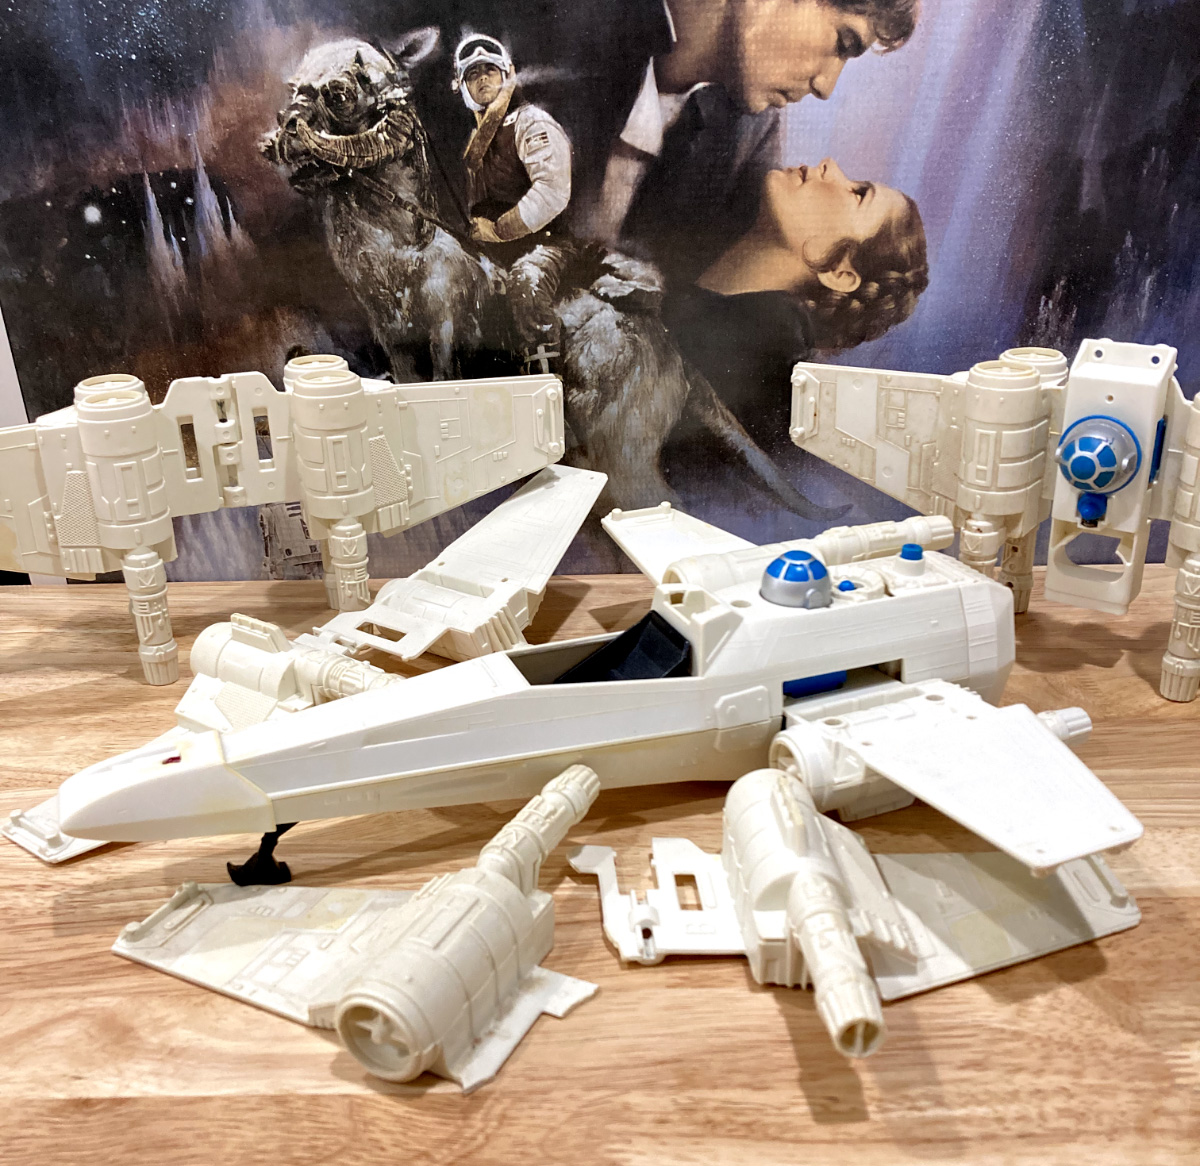 You can fix the broken wings on an X-Wing Fighter with our repair kits.